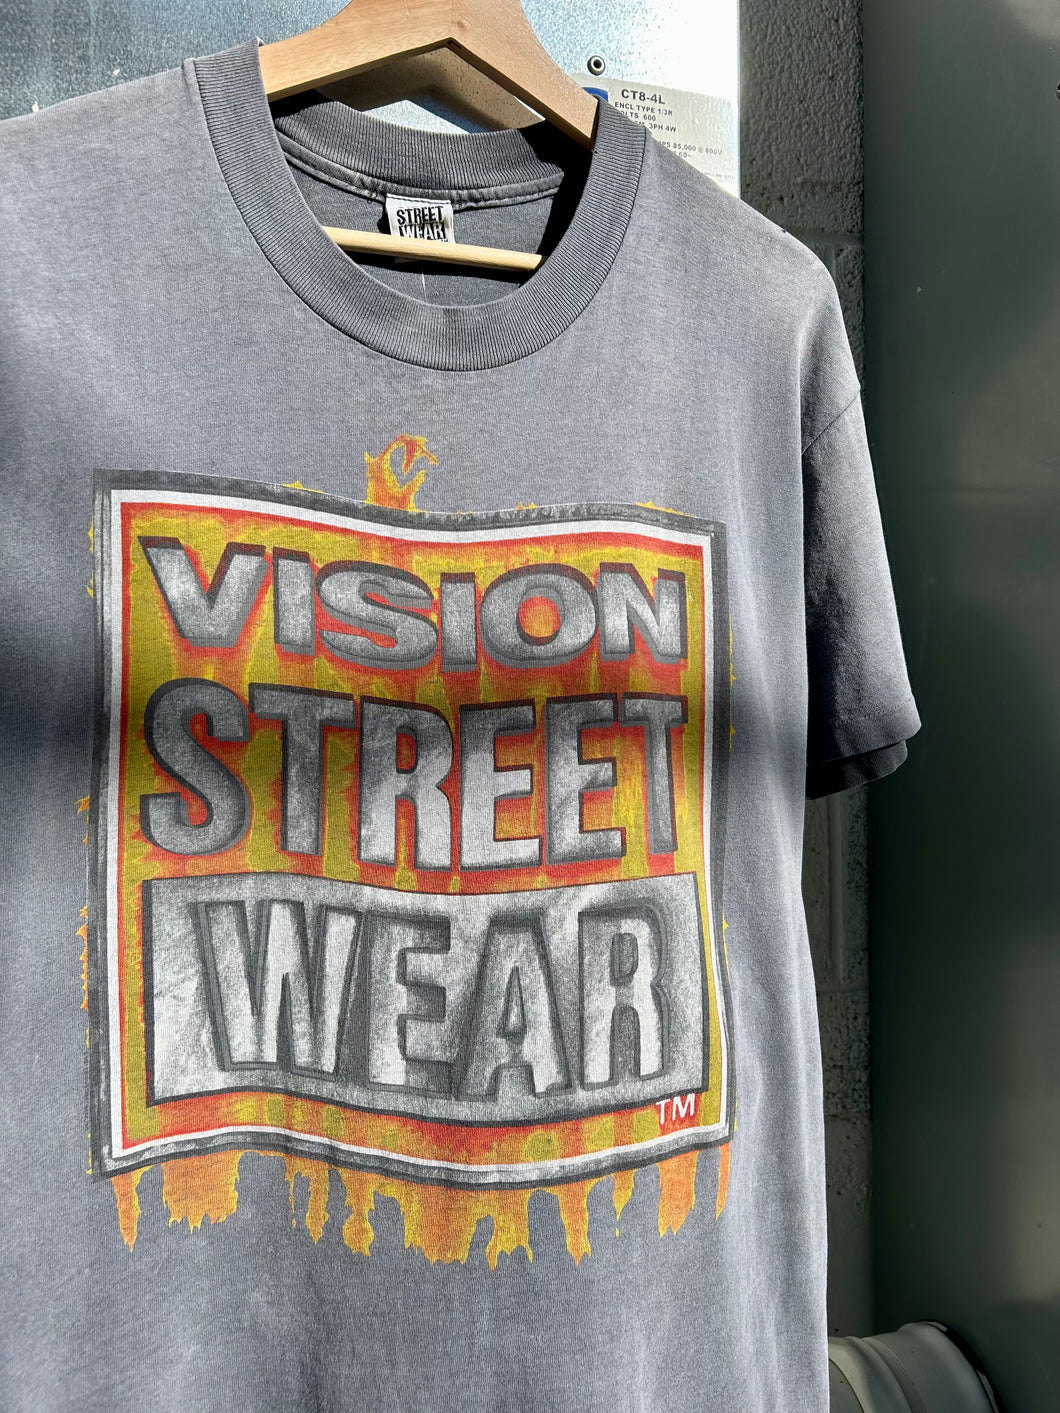 1987 Vision Street Wear T-Shirt. Size Large